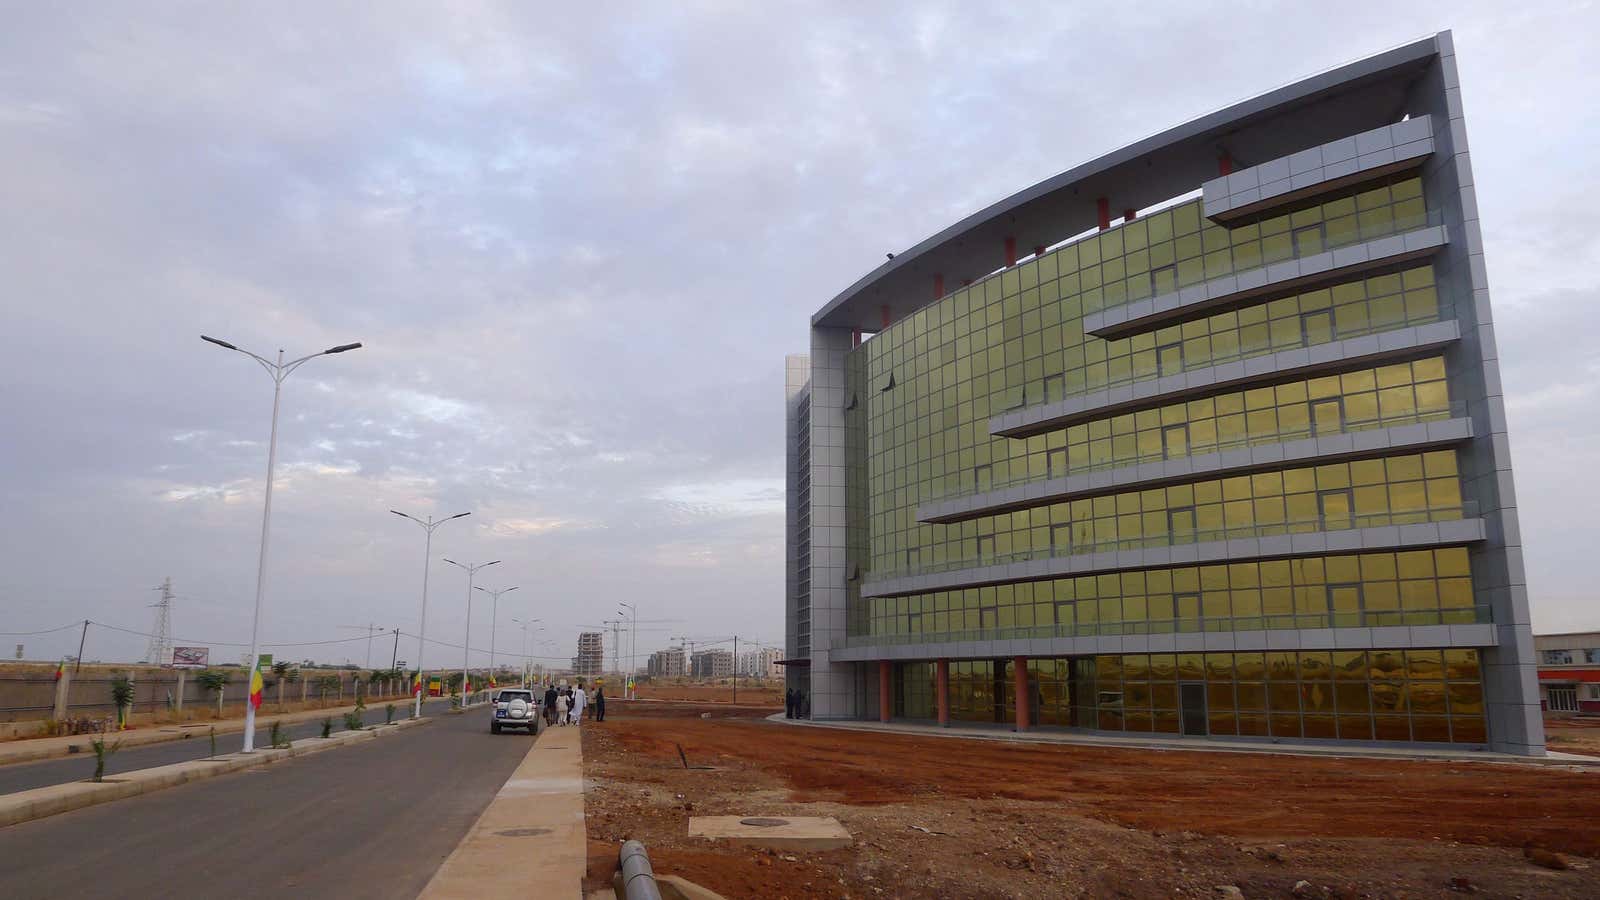 Senegal’s $2 billion Diomniadio city is due to be completed by 2035.